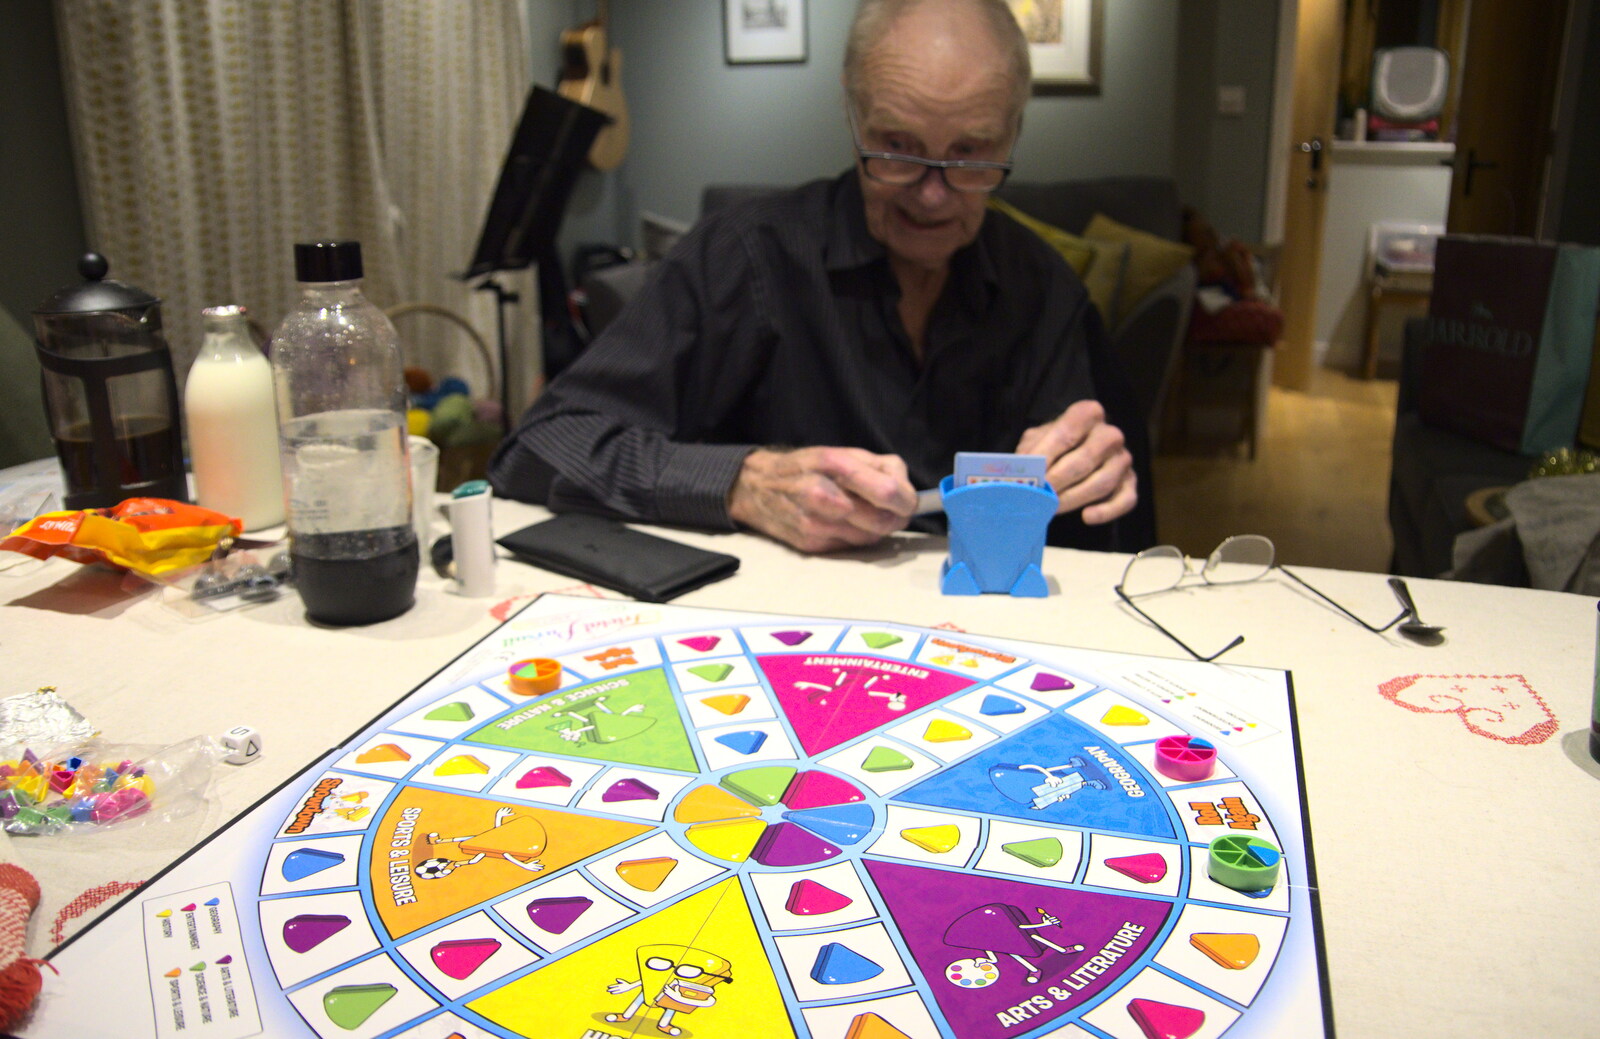 We play Trivial Pursuit from Christmas Day, Brome, Suffolk - 25th December 2020